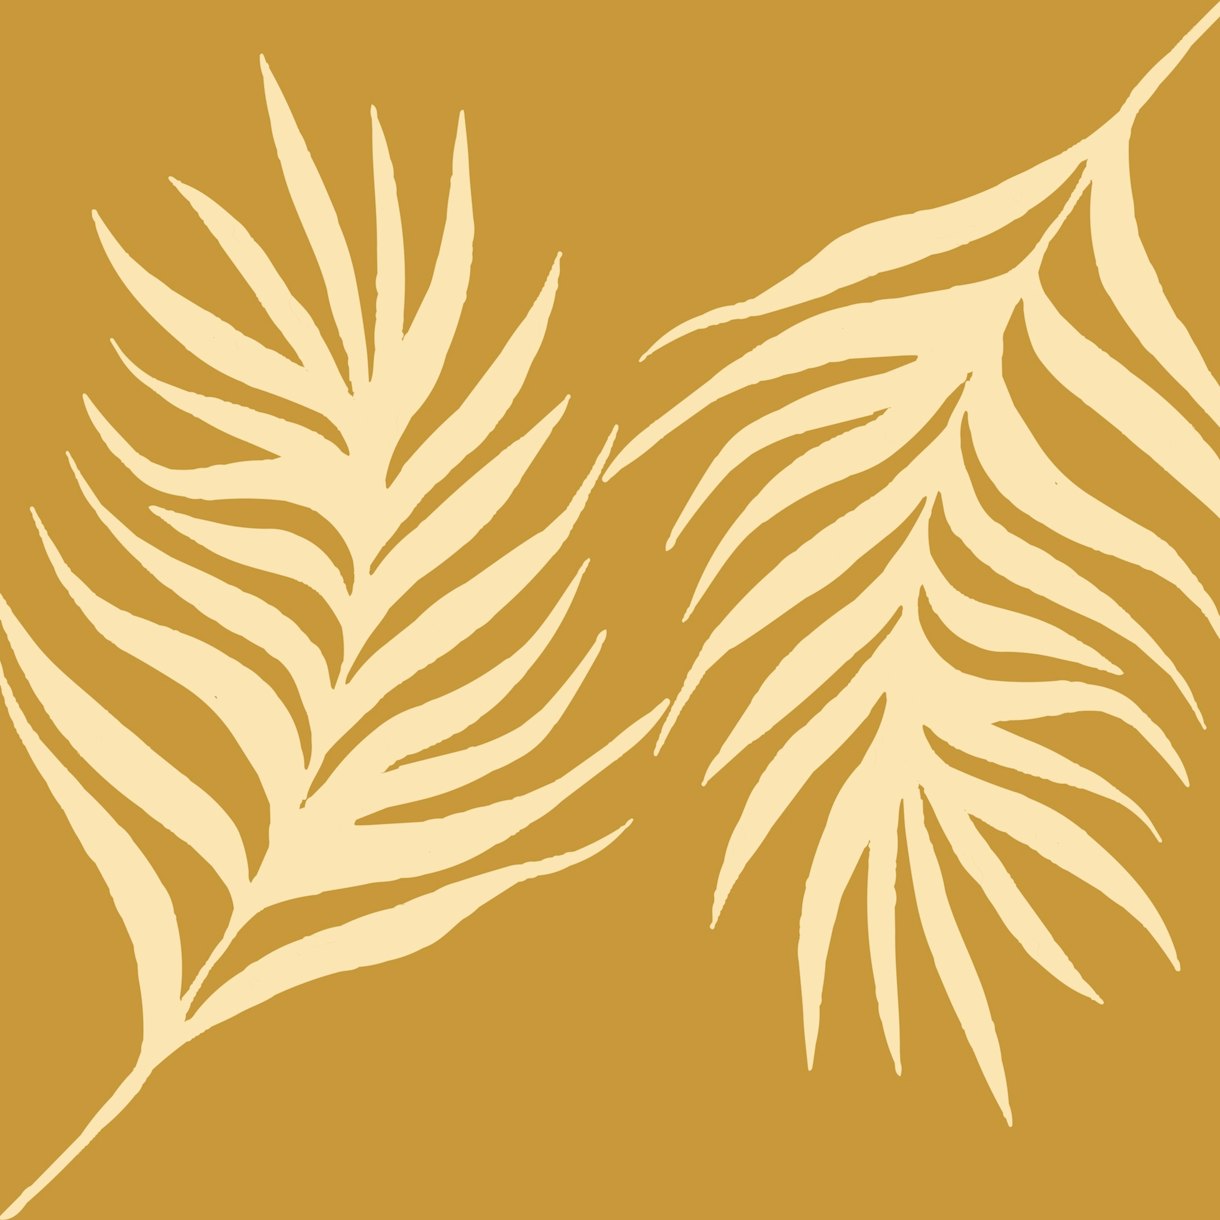 Golden Palm Leaves Wallpaper | Happywall